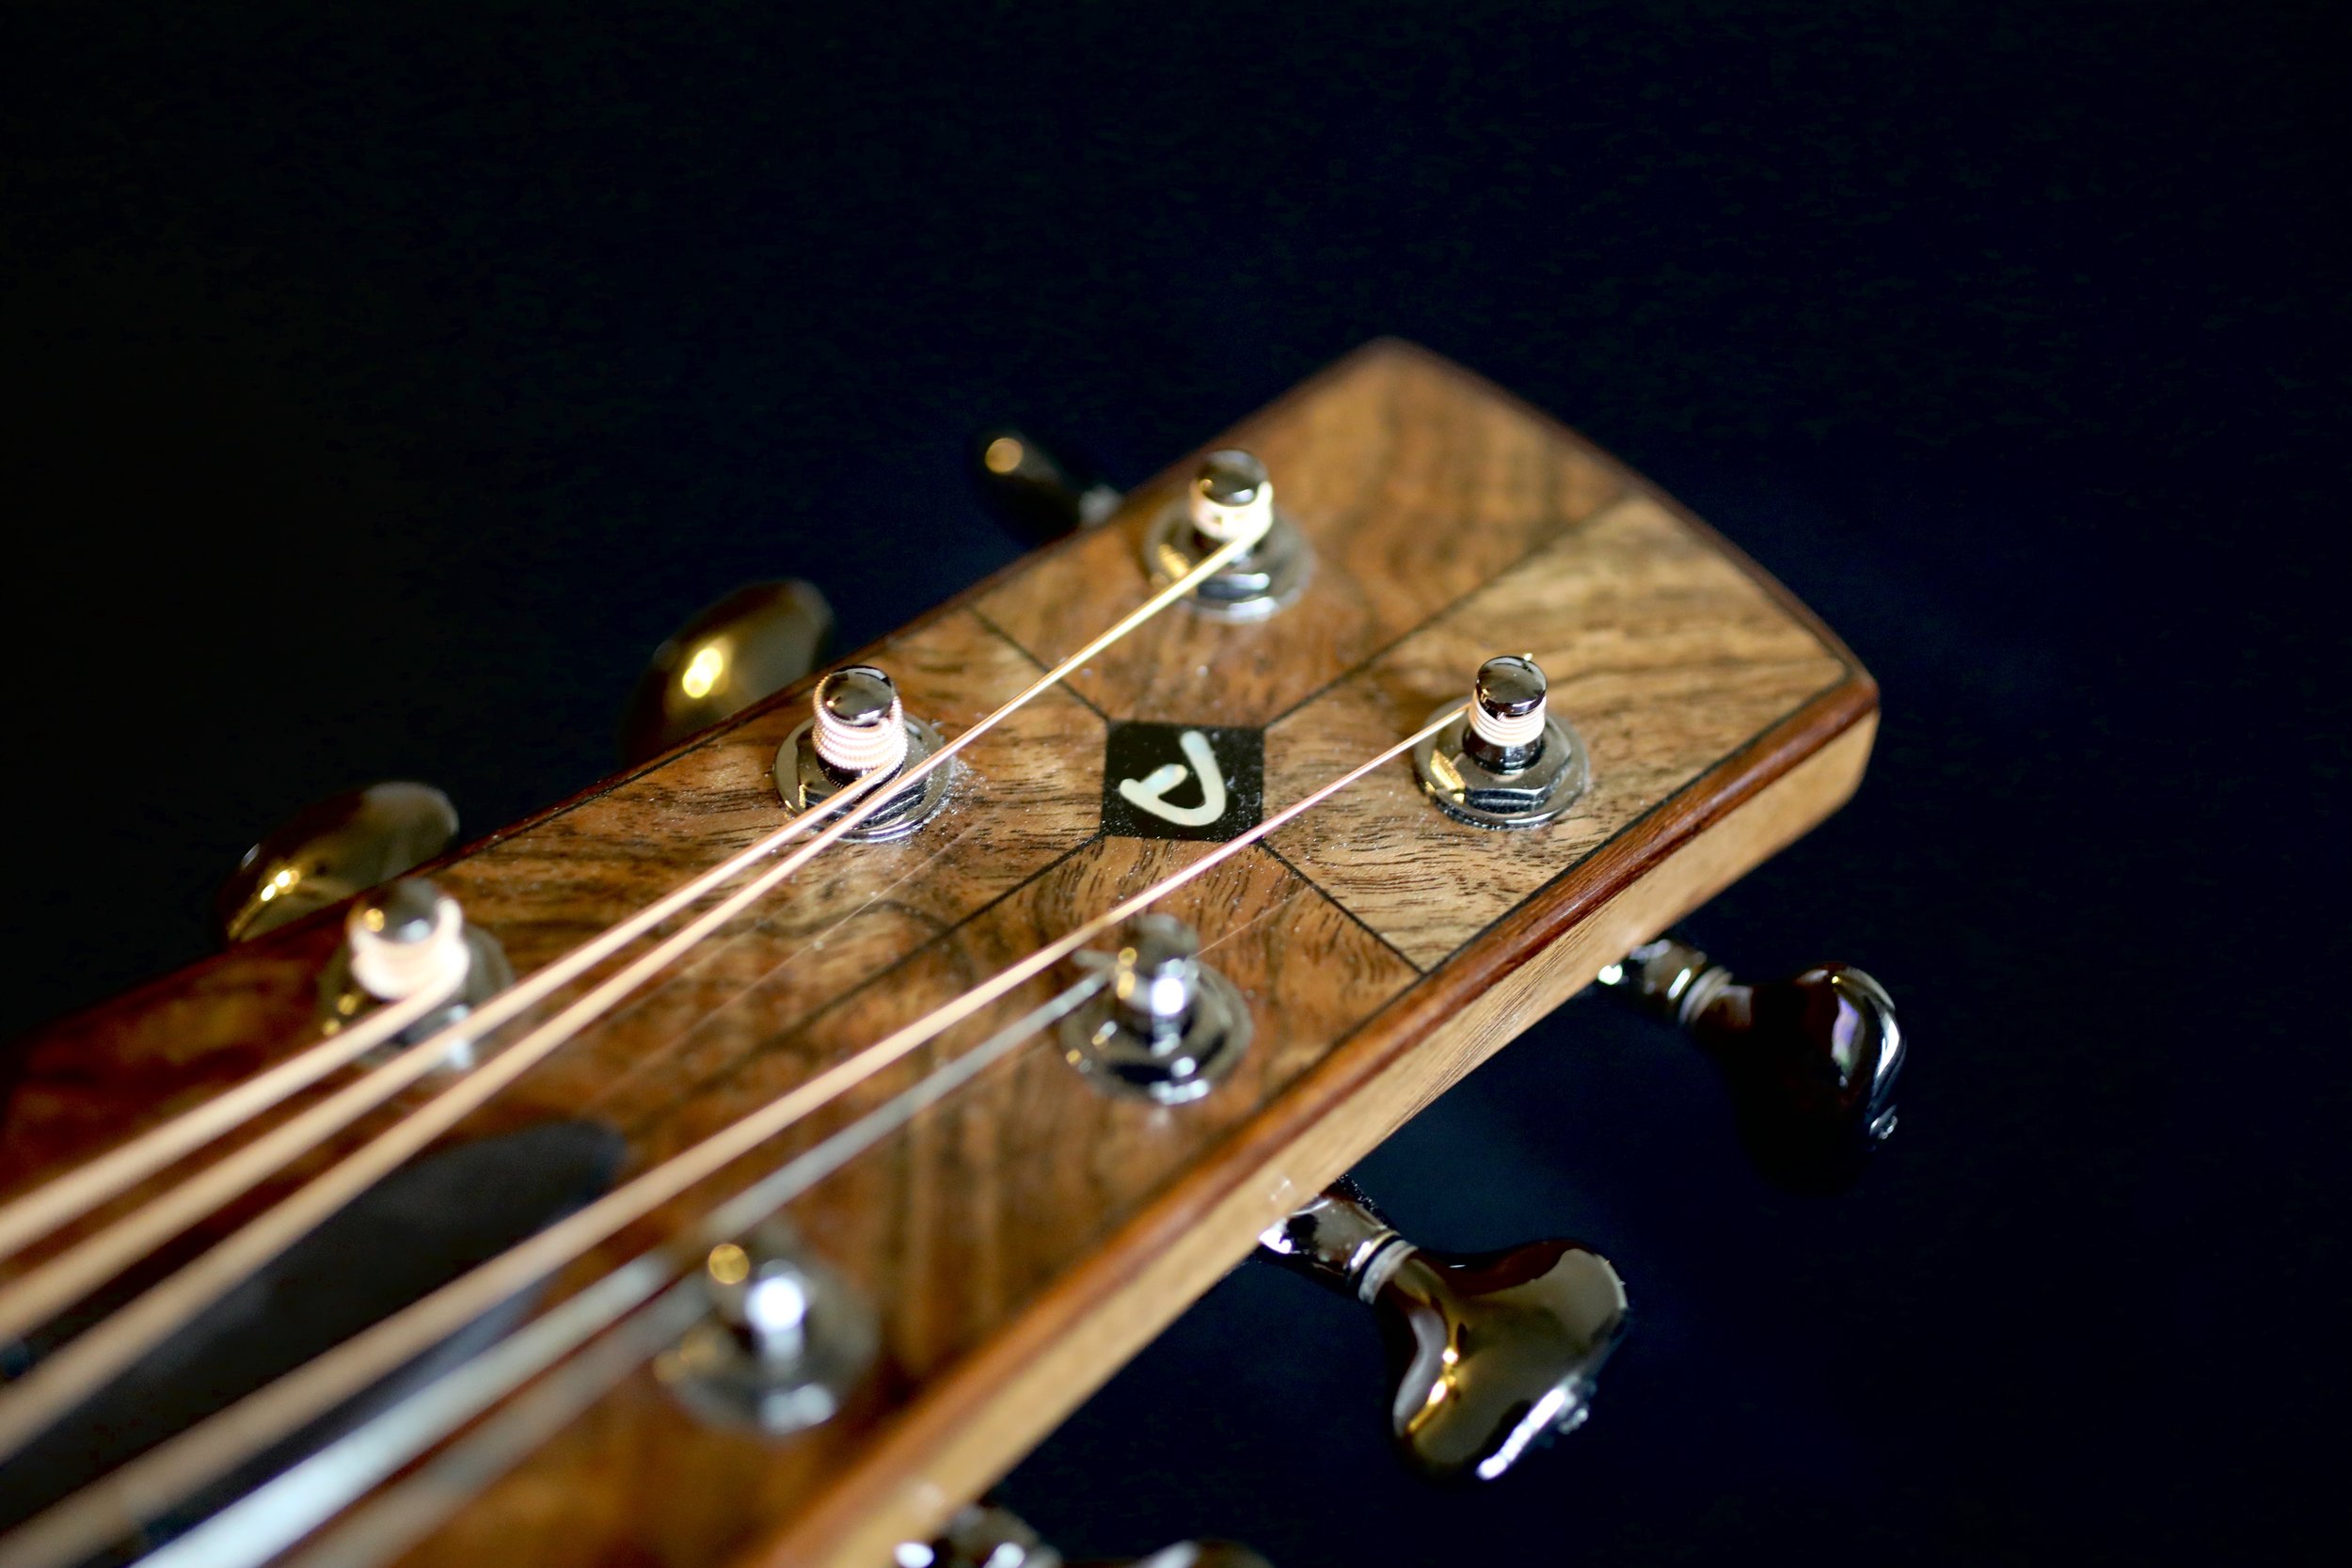 Four-Way Bookmatched Headstock with Decorative Binding